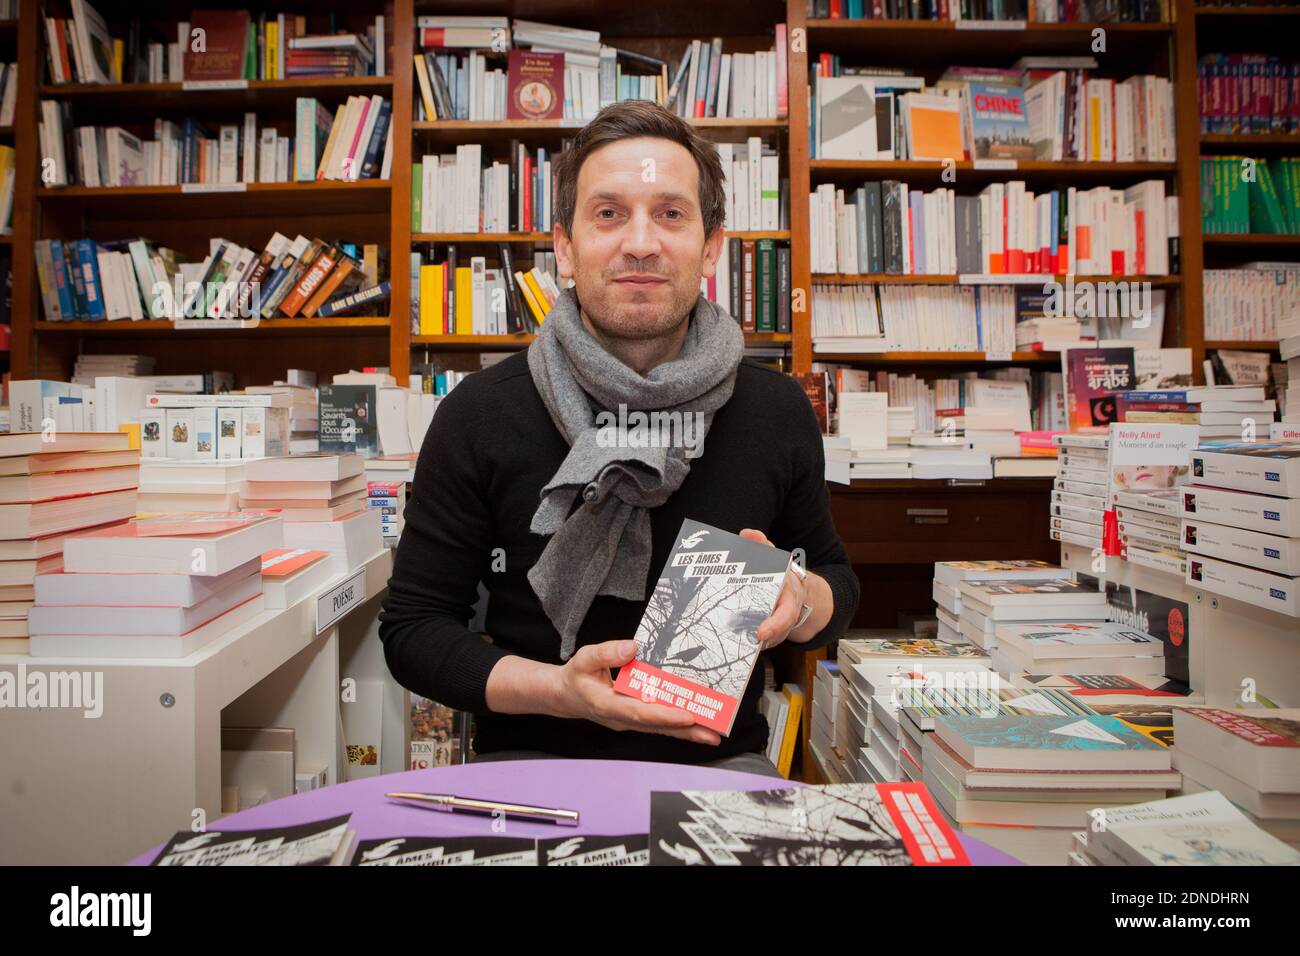 The winner of the Prix du Roman Thriller 2015 Olivier Taveau signs copies of his book 'Les Ames Troubles' at 'Des Livres et des hommes' bookstore during the 7th Thriller Film Festival (Festival International du Film Policier) in Beaune, France on March 28, 2015. Photo by Audrey Poree/ABACAPRESS.COM Stock Photo